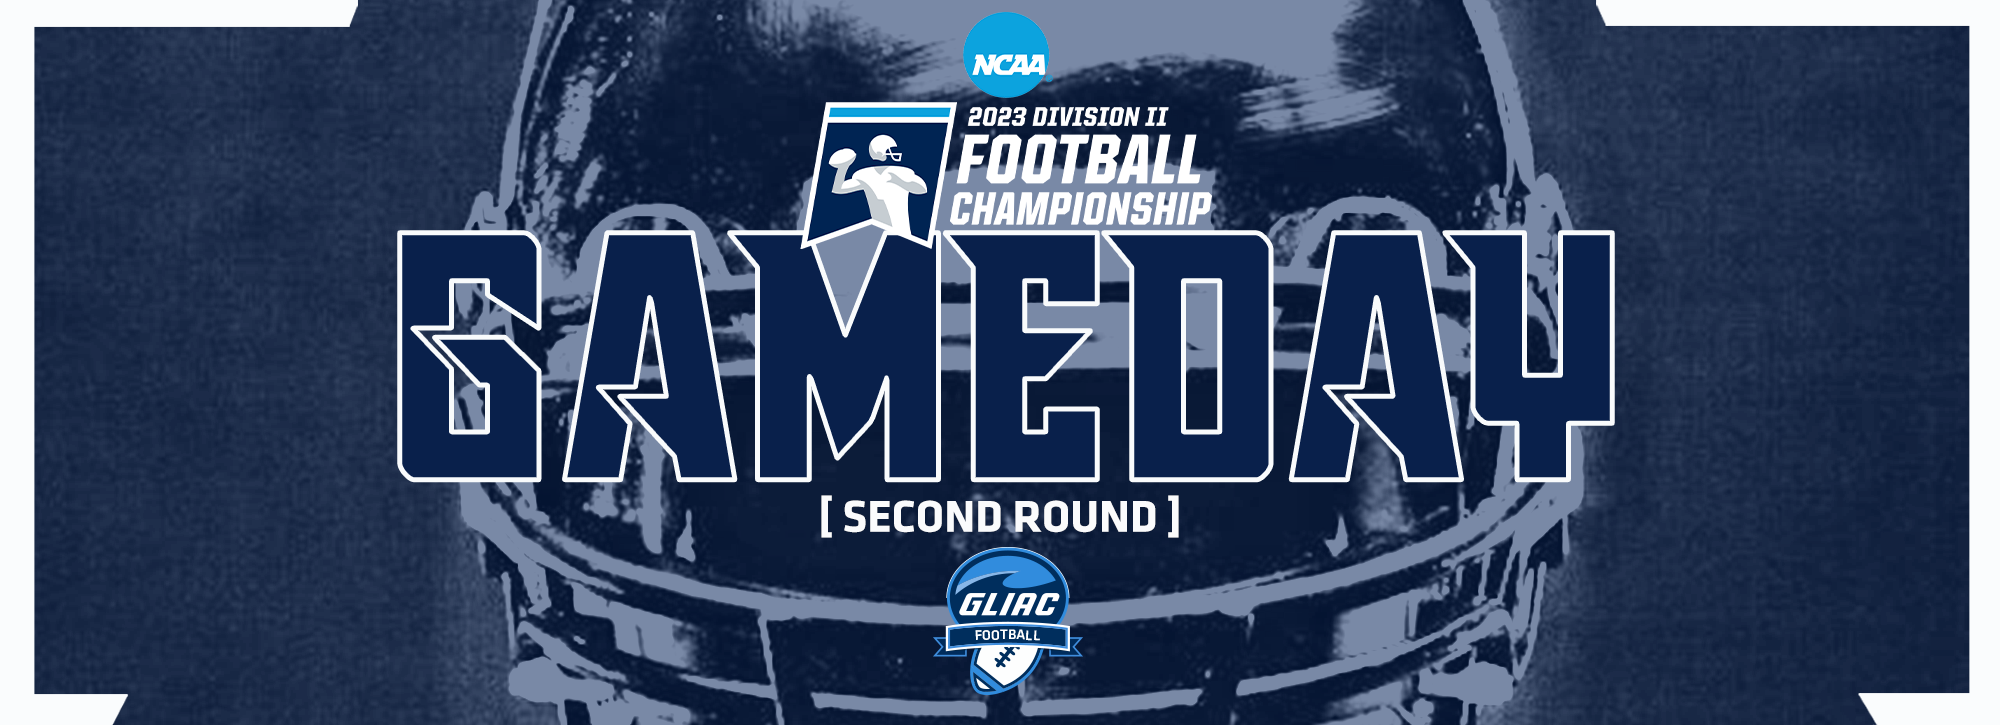 Grand Valley State to host Pittsburg State in second round of NCAA Division II Football playoffs